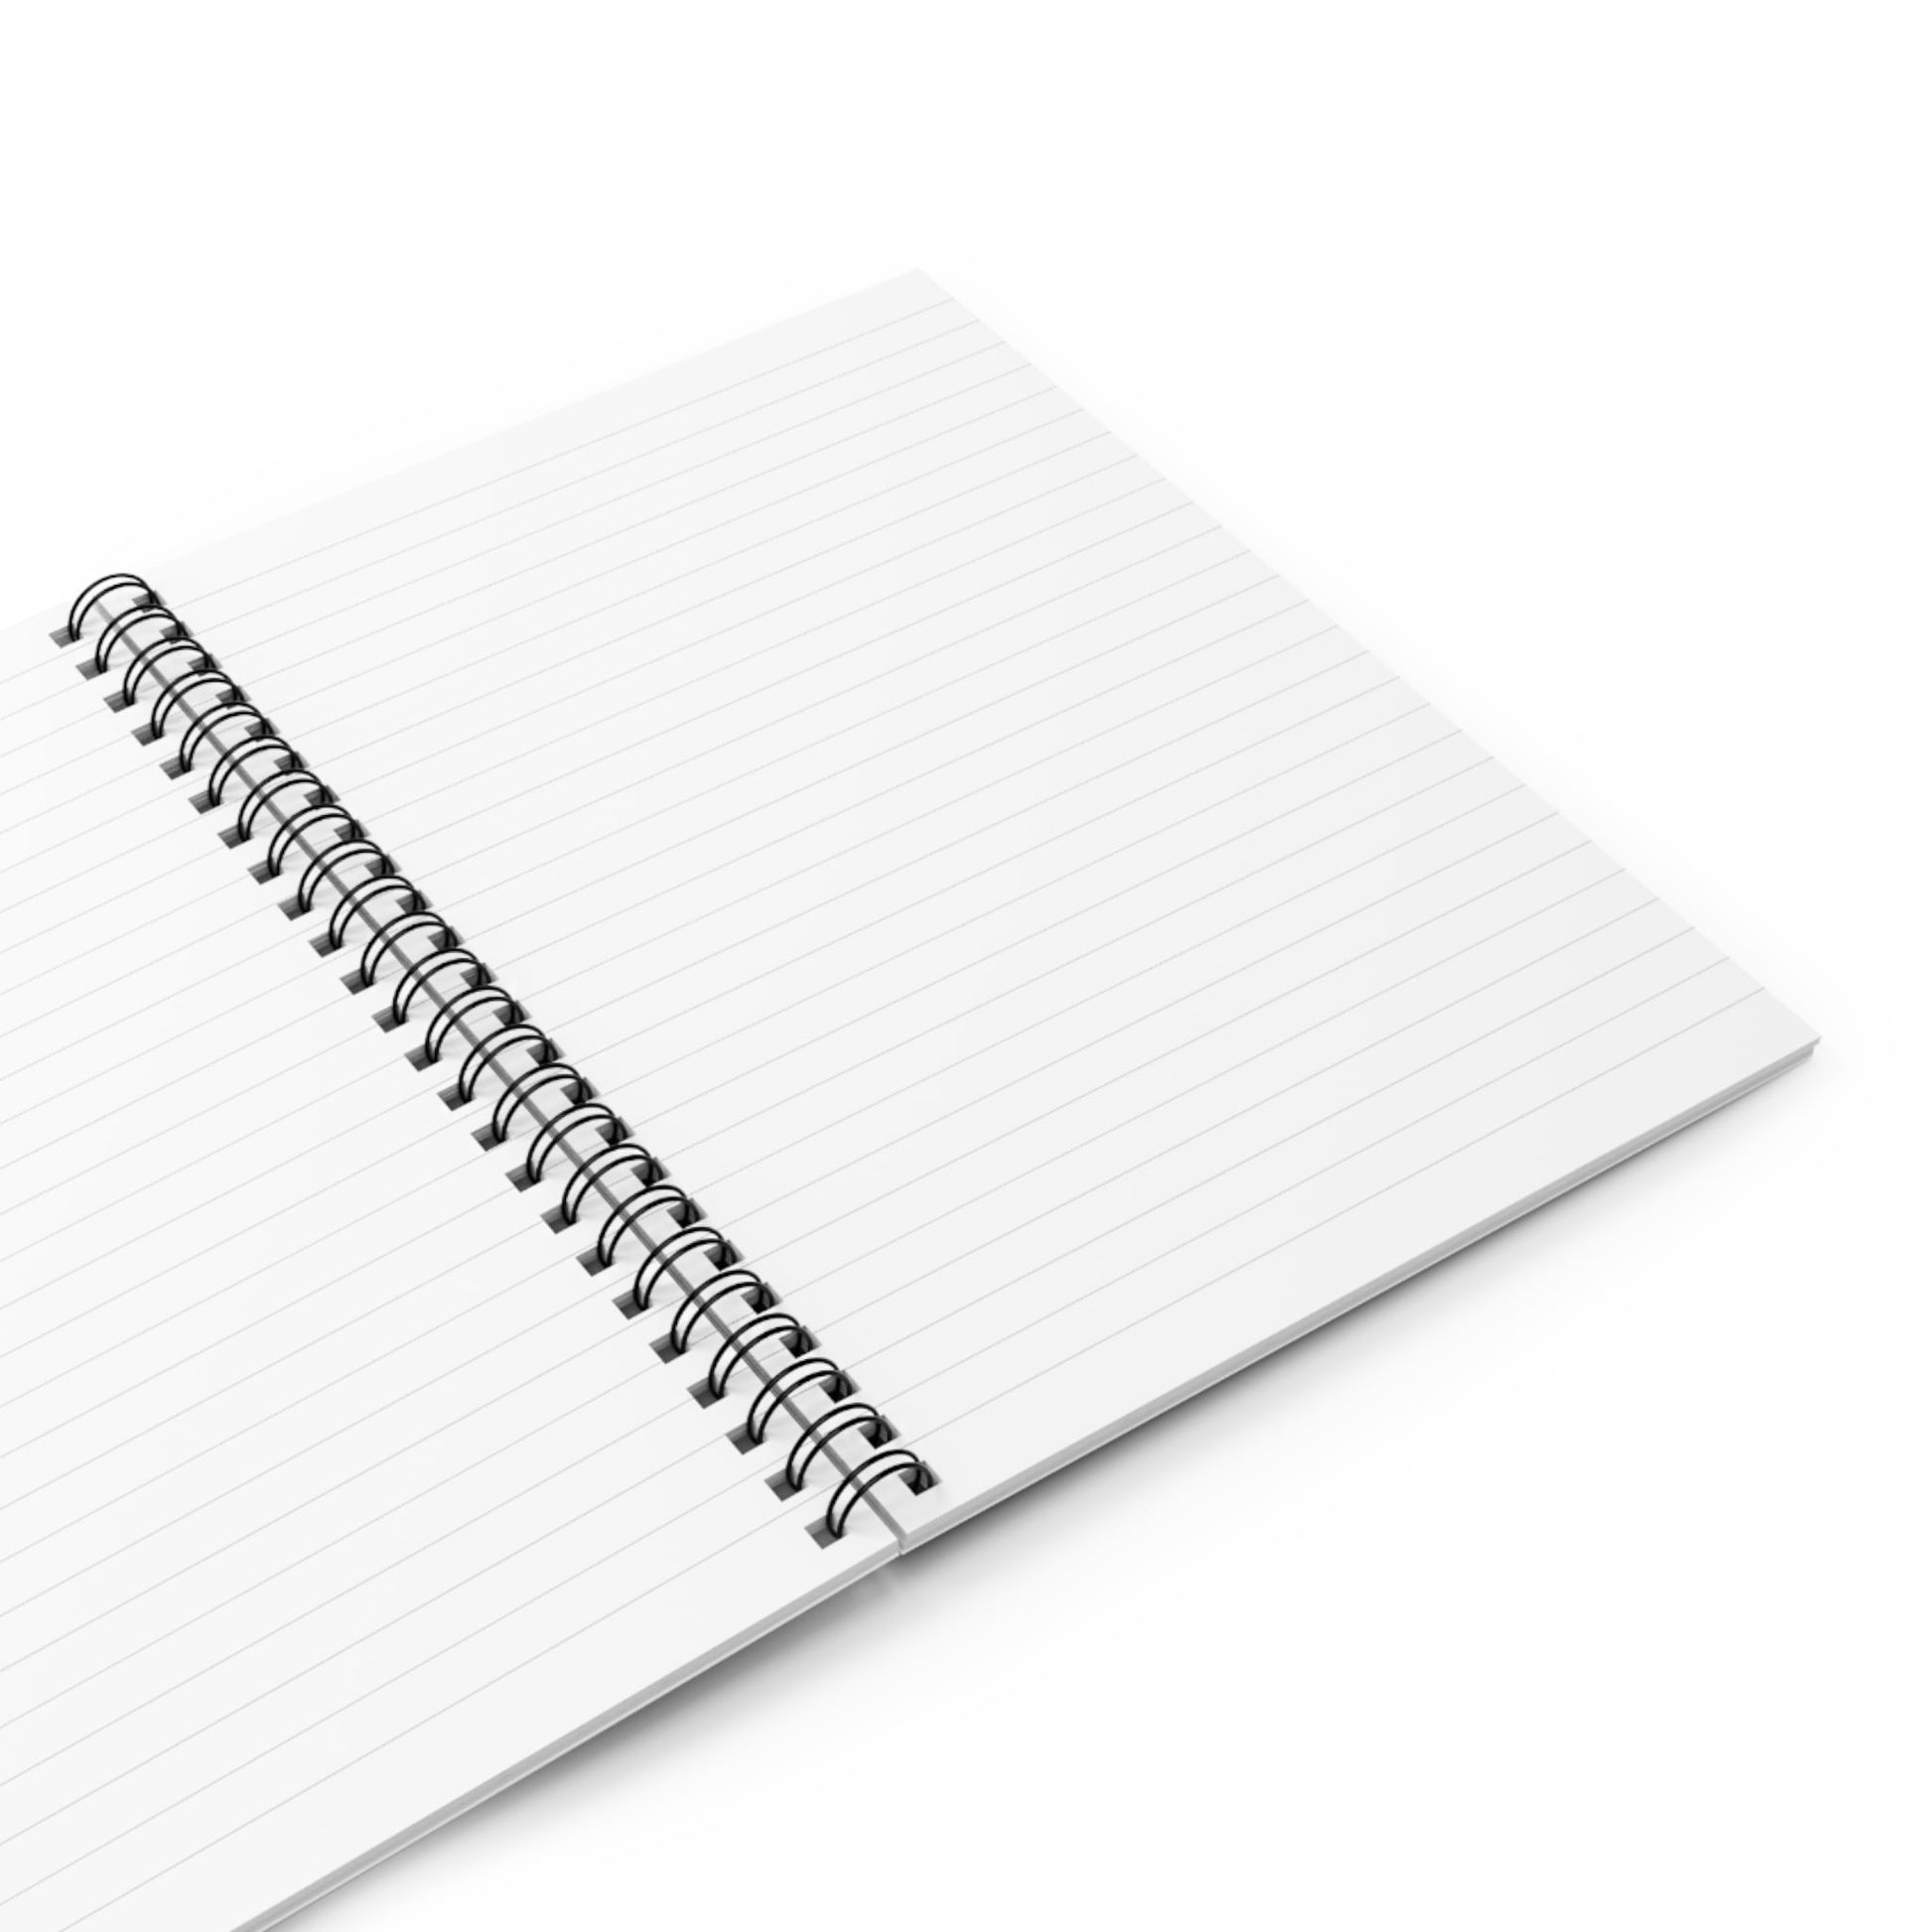 Spiral Notebook with Winter Landscape Cover Opened with Blank White College Ruled Pages